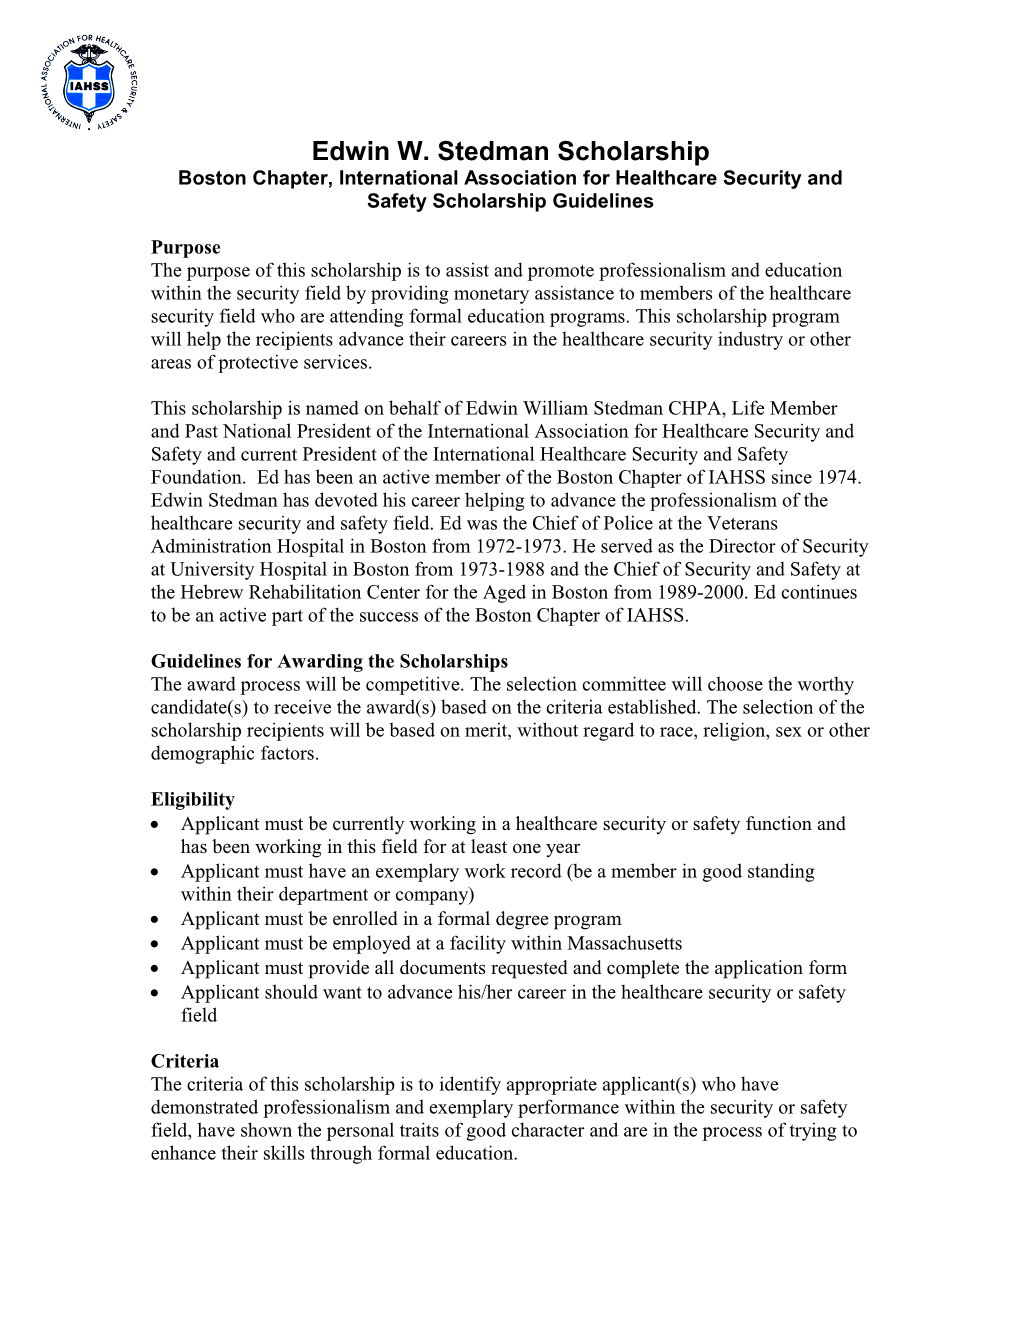 Boston Chapter, International Association for Healthcare Security and Safety Scholarship